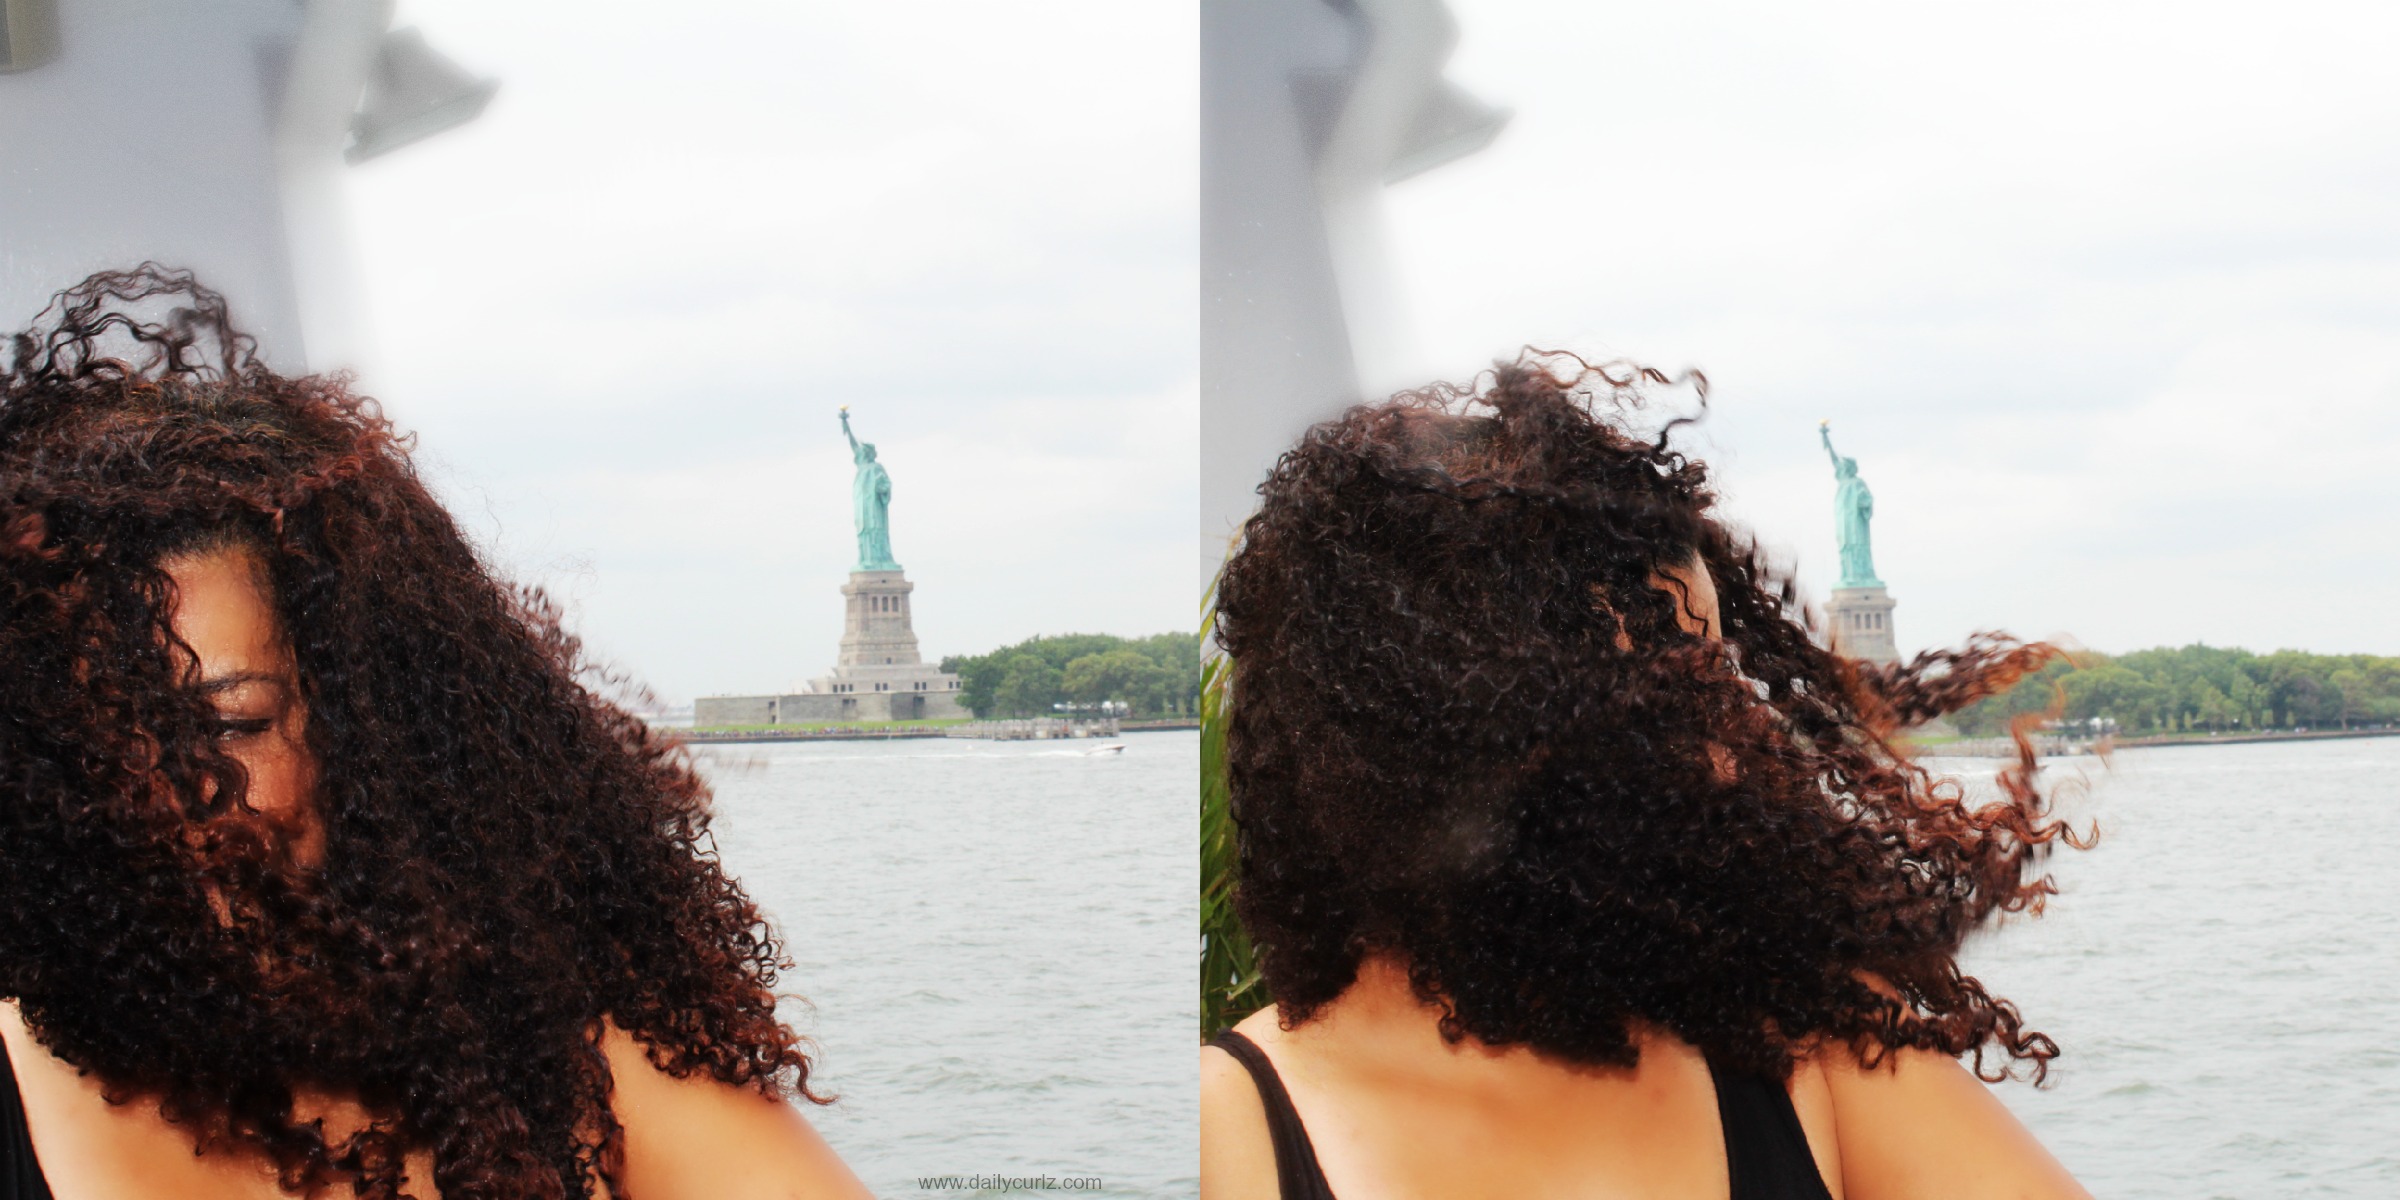 The best way to see the statue of liberty